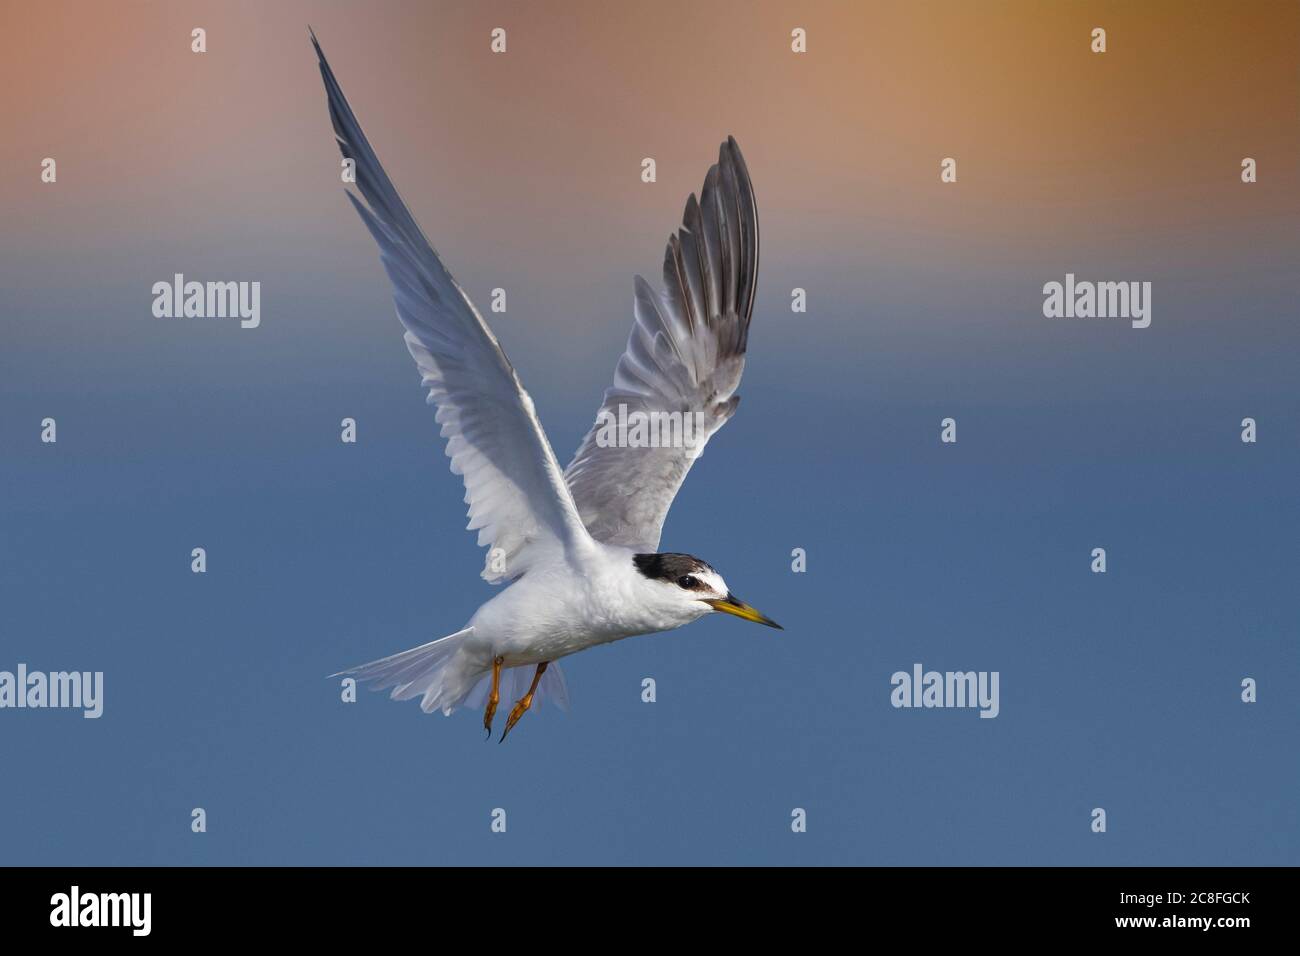 little tern (Sterna albifrons, Sternula albifrons), Hovering in mid air, Italy, Leghorn Stock Photo